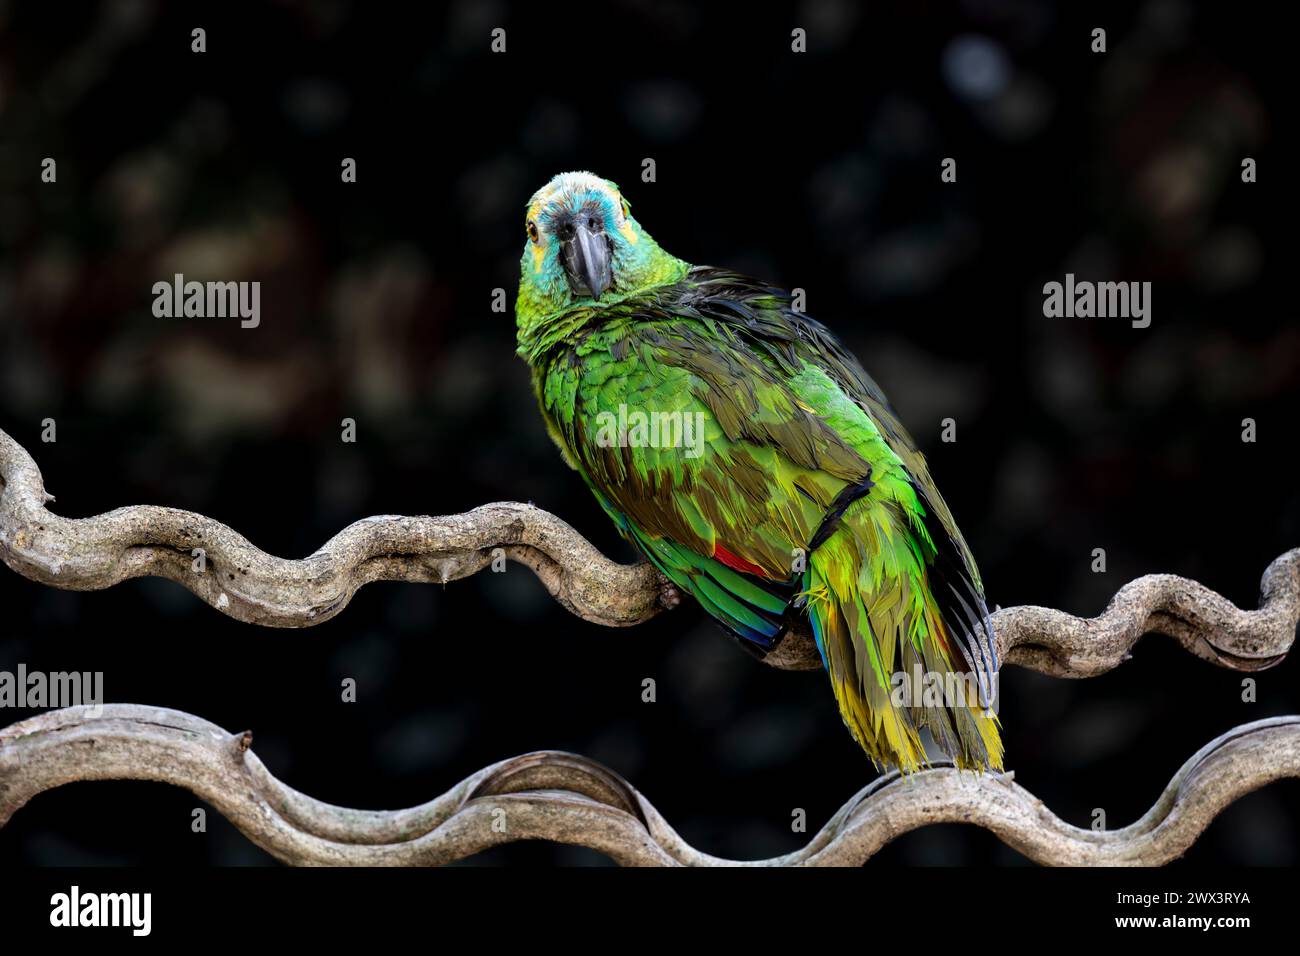 Blue-fronted Amazon Parrot, Amazona aestiva, sometimes called Turquiose-fronted Parrot, feathers ruffled, Pantanal, Mato Grosso, Brazil Stock Photo